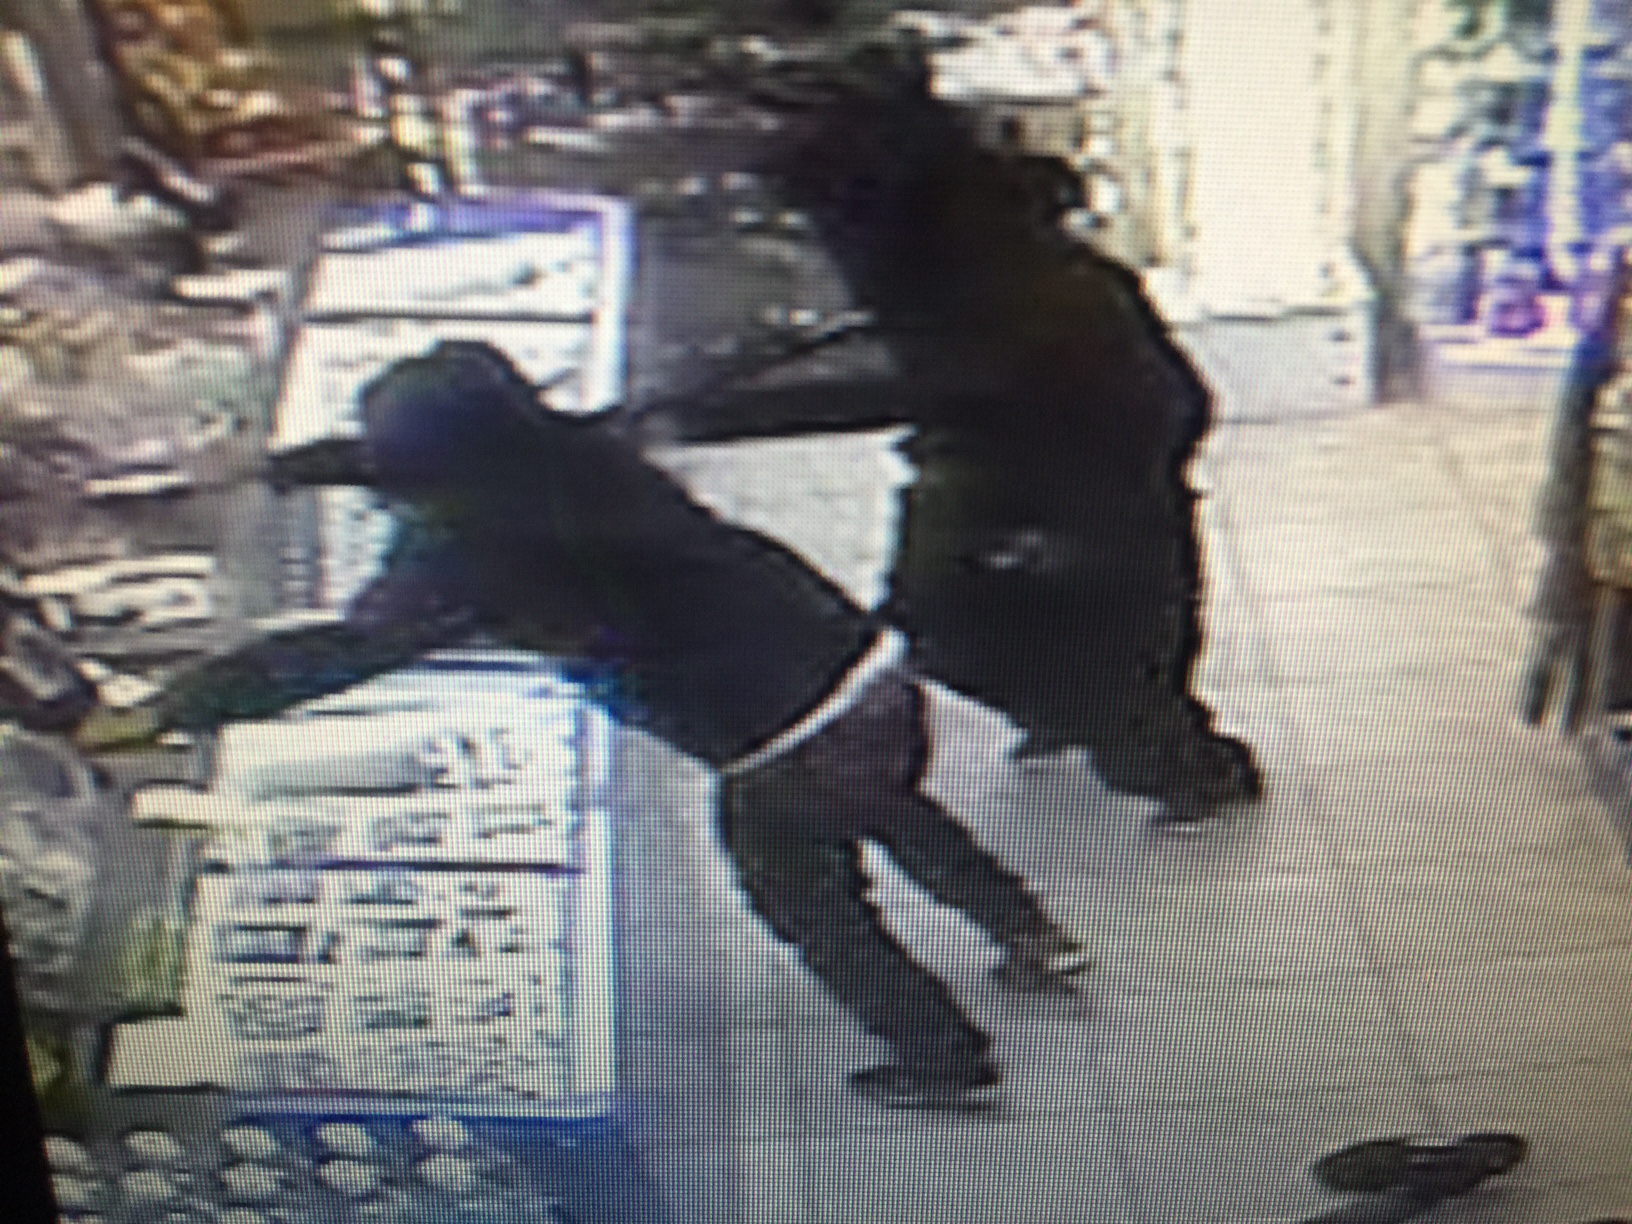 Surveillance video of the two suspects from the armed robbery that killed Prakash Patel.